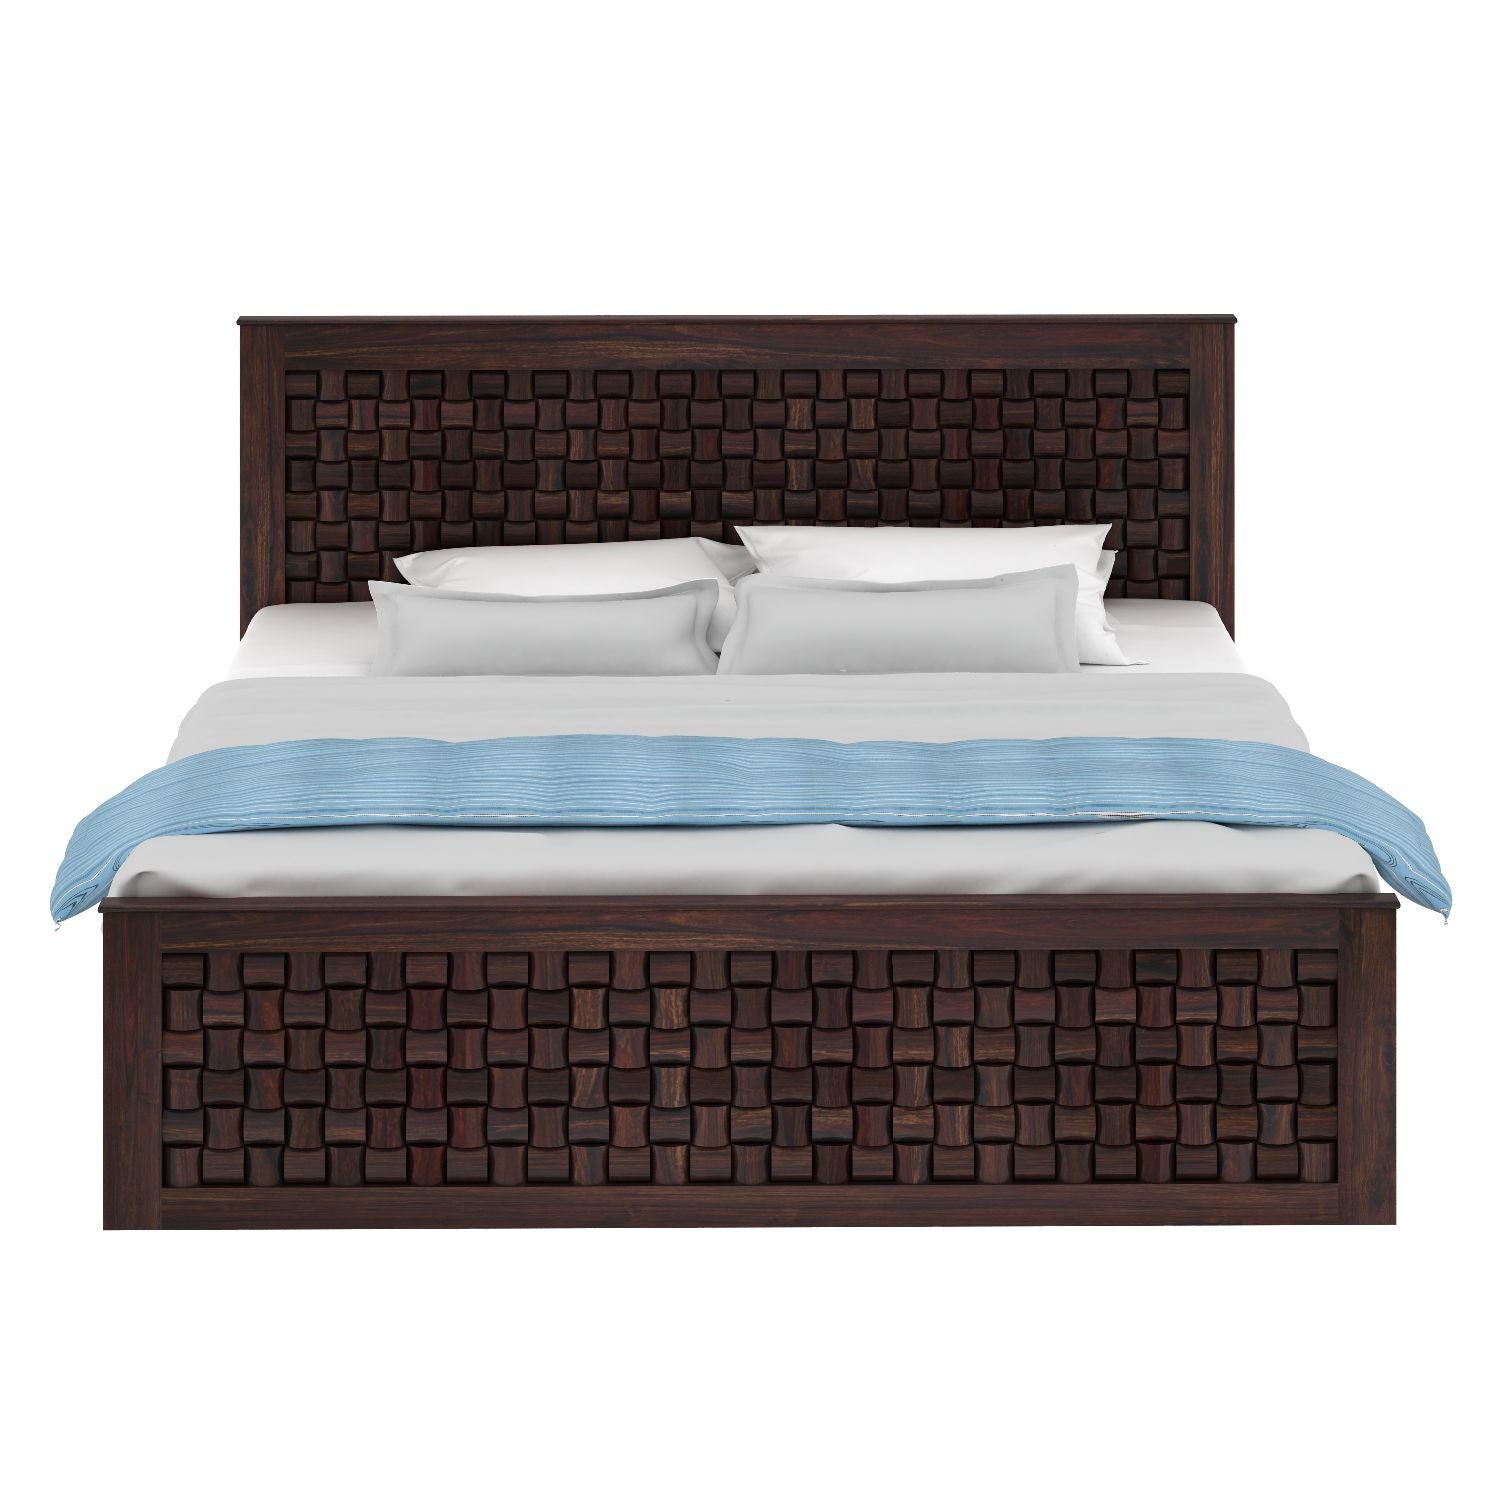 Olivia Solid Sheesham Wood Bed With Box Storage (Queen Size, Walnut Finish)